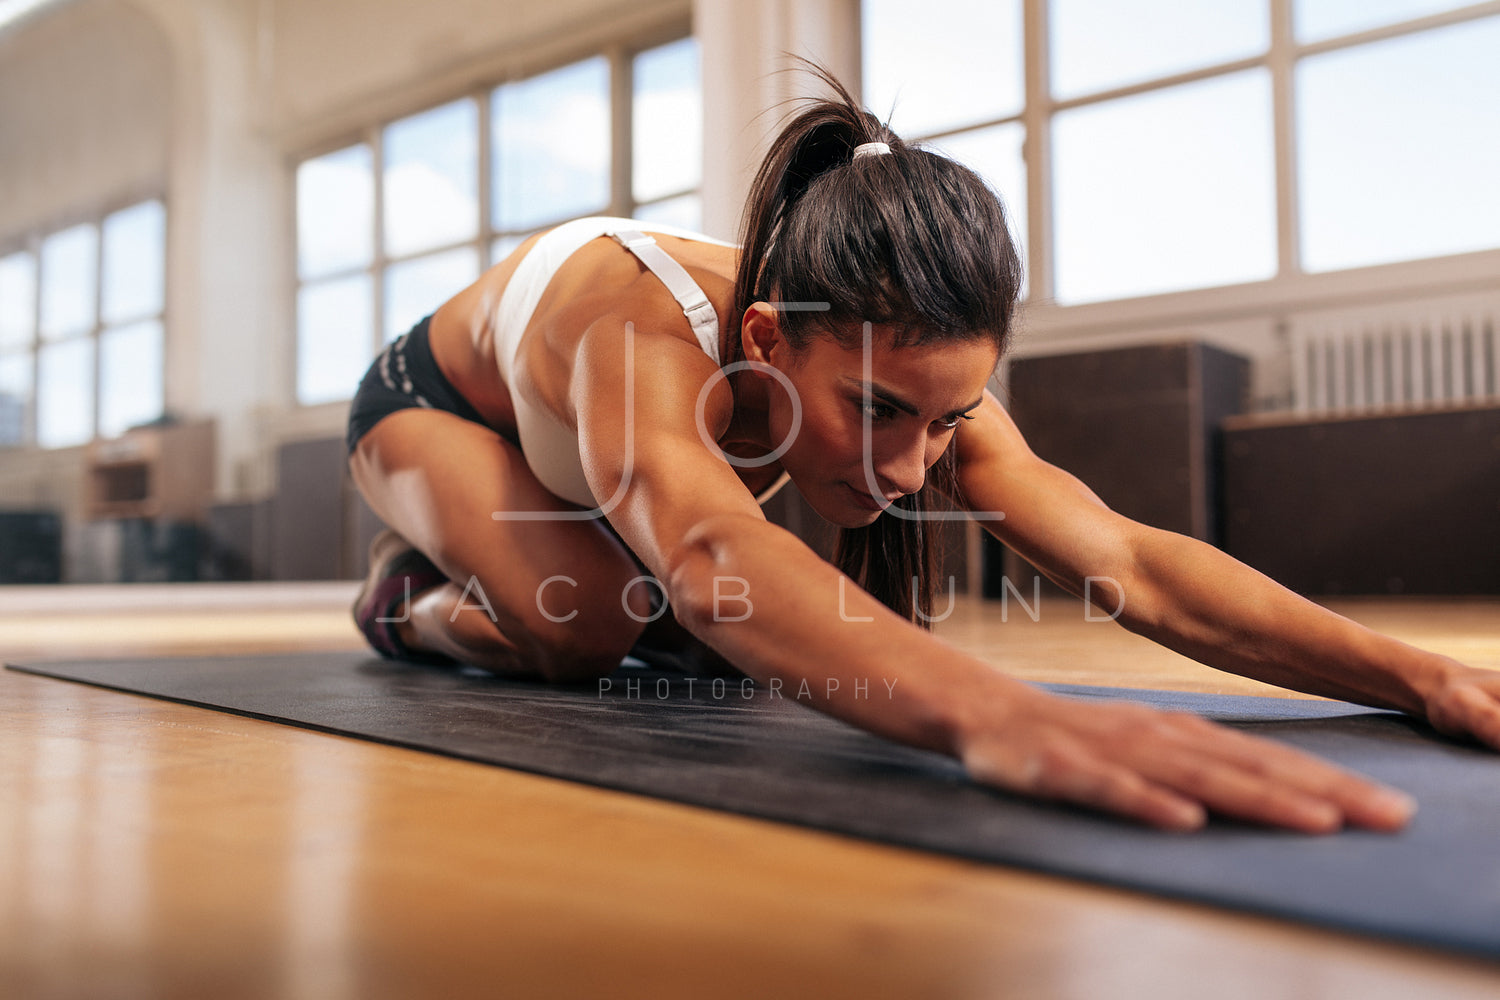 Muscular woman doing stretching workout in gym – Jacob Lund